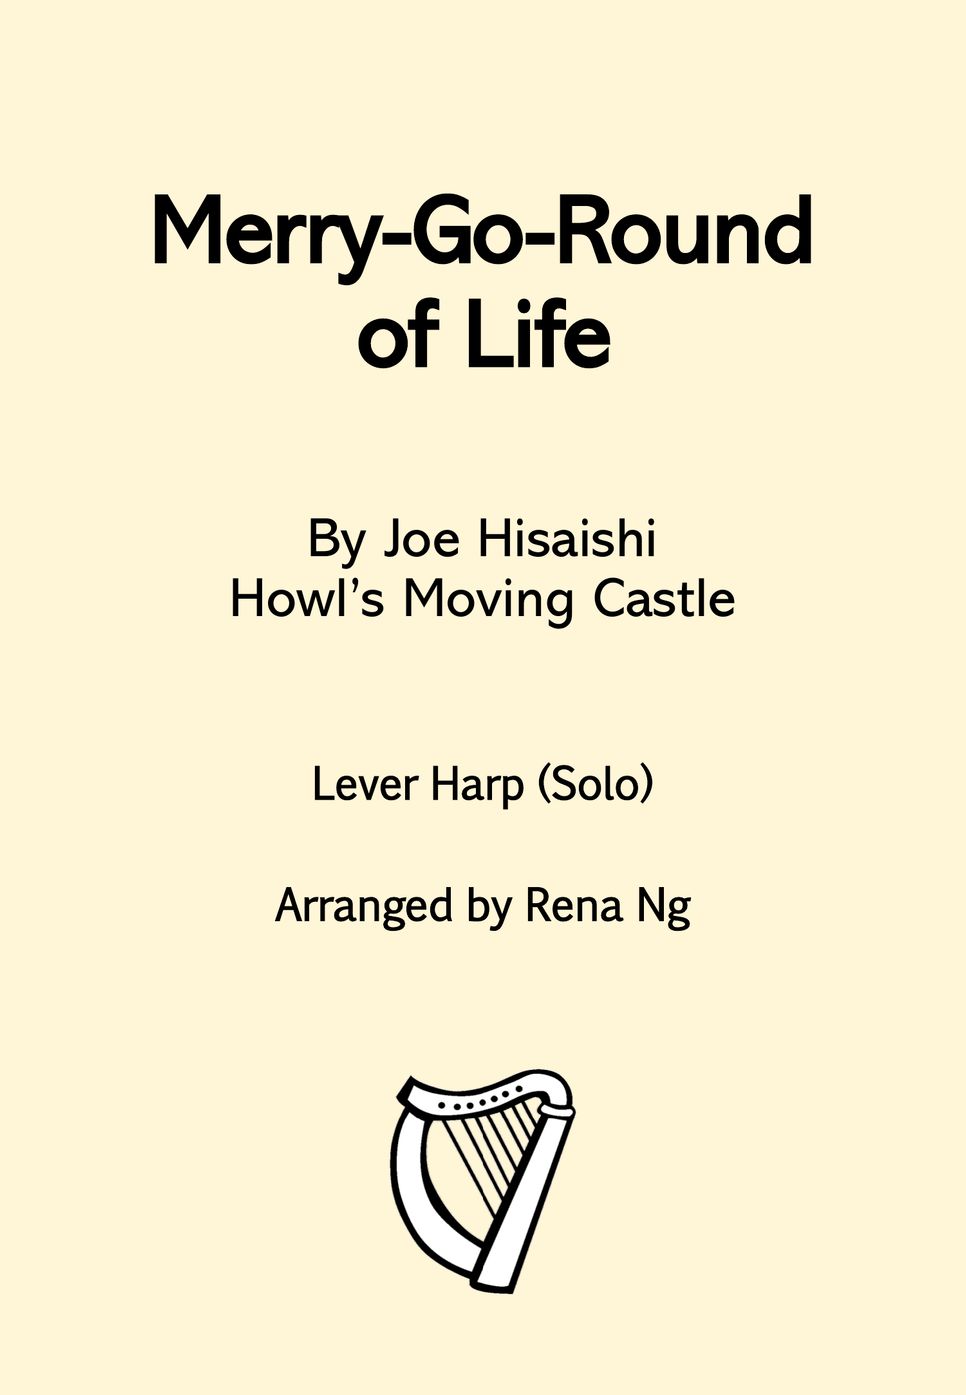 Joe Hisaishi - Merry Go Round of Life (Lever Harp Solo) - Advanced Intermediate by Harp With Me